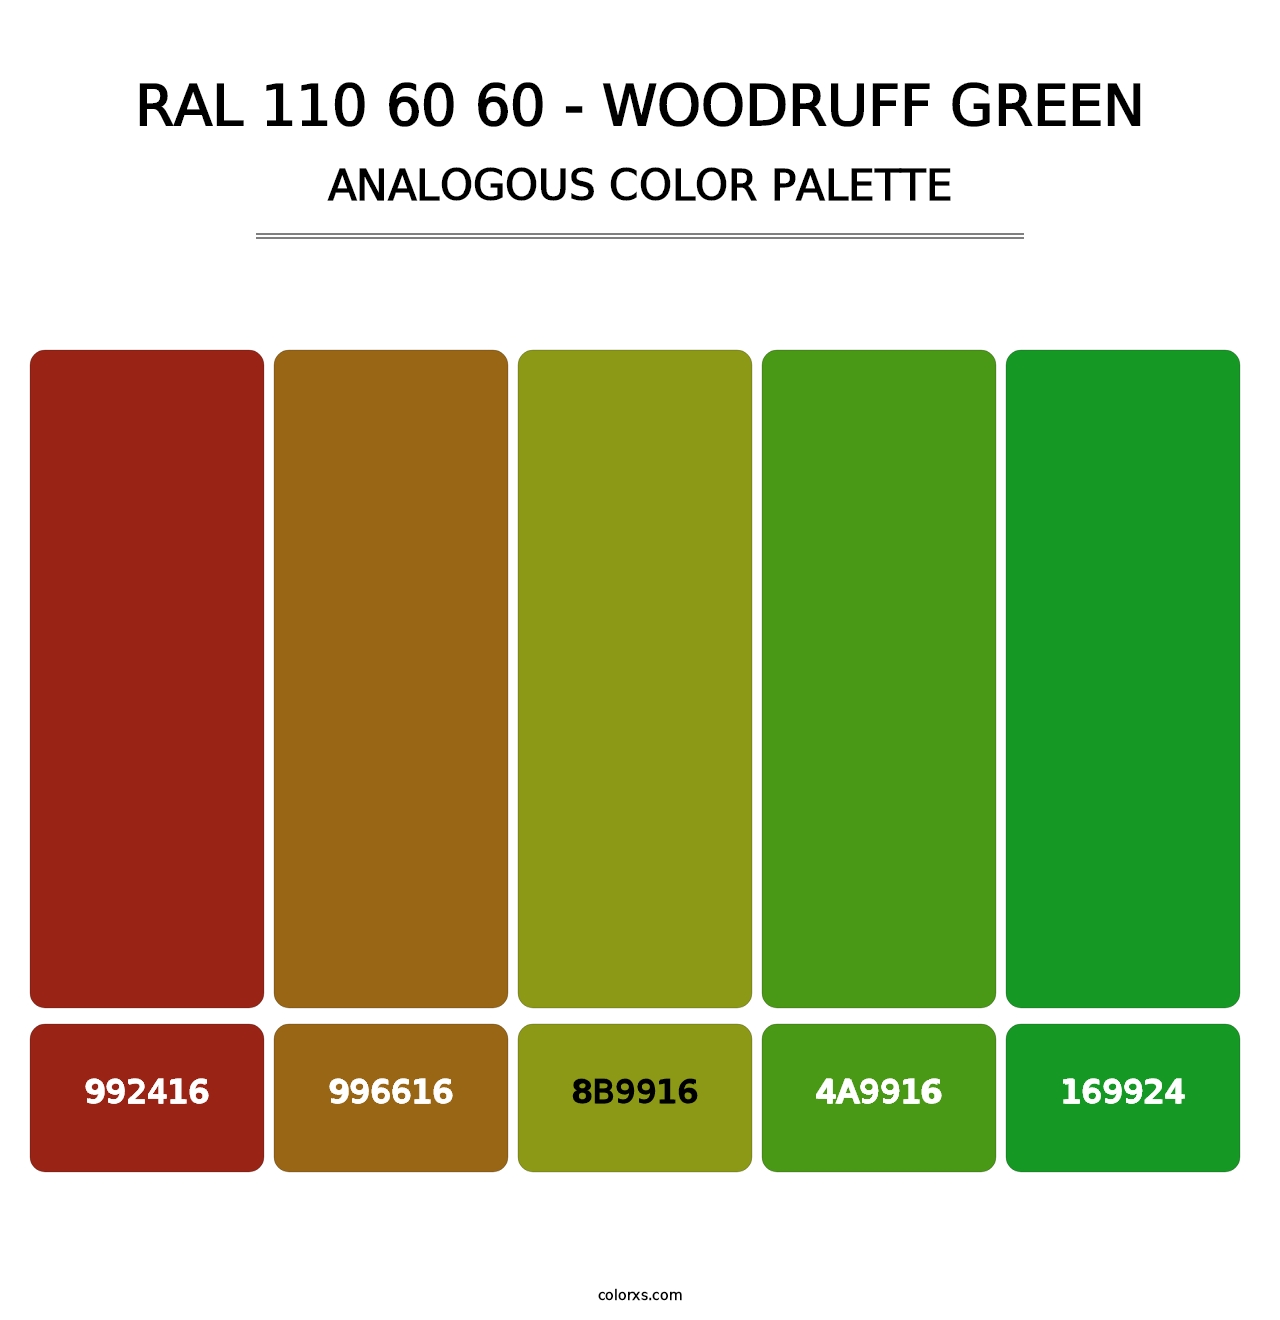 RAL 110 60 60 - Woodruff Green - Analogous Color Palette